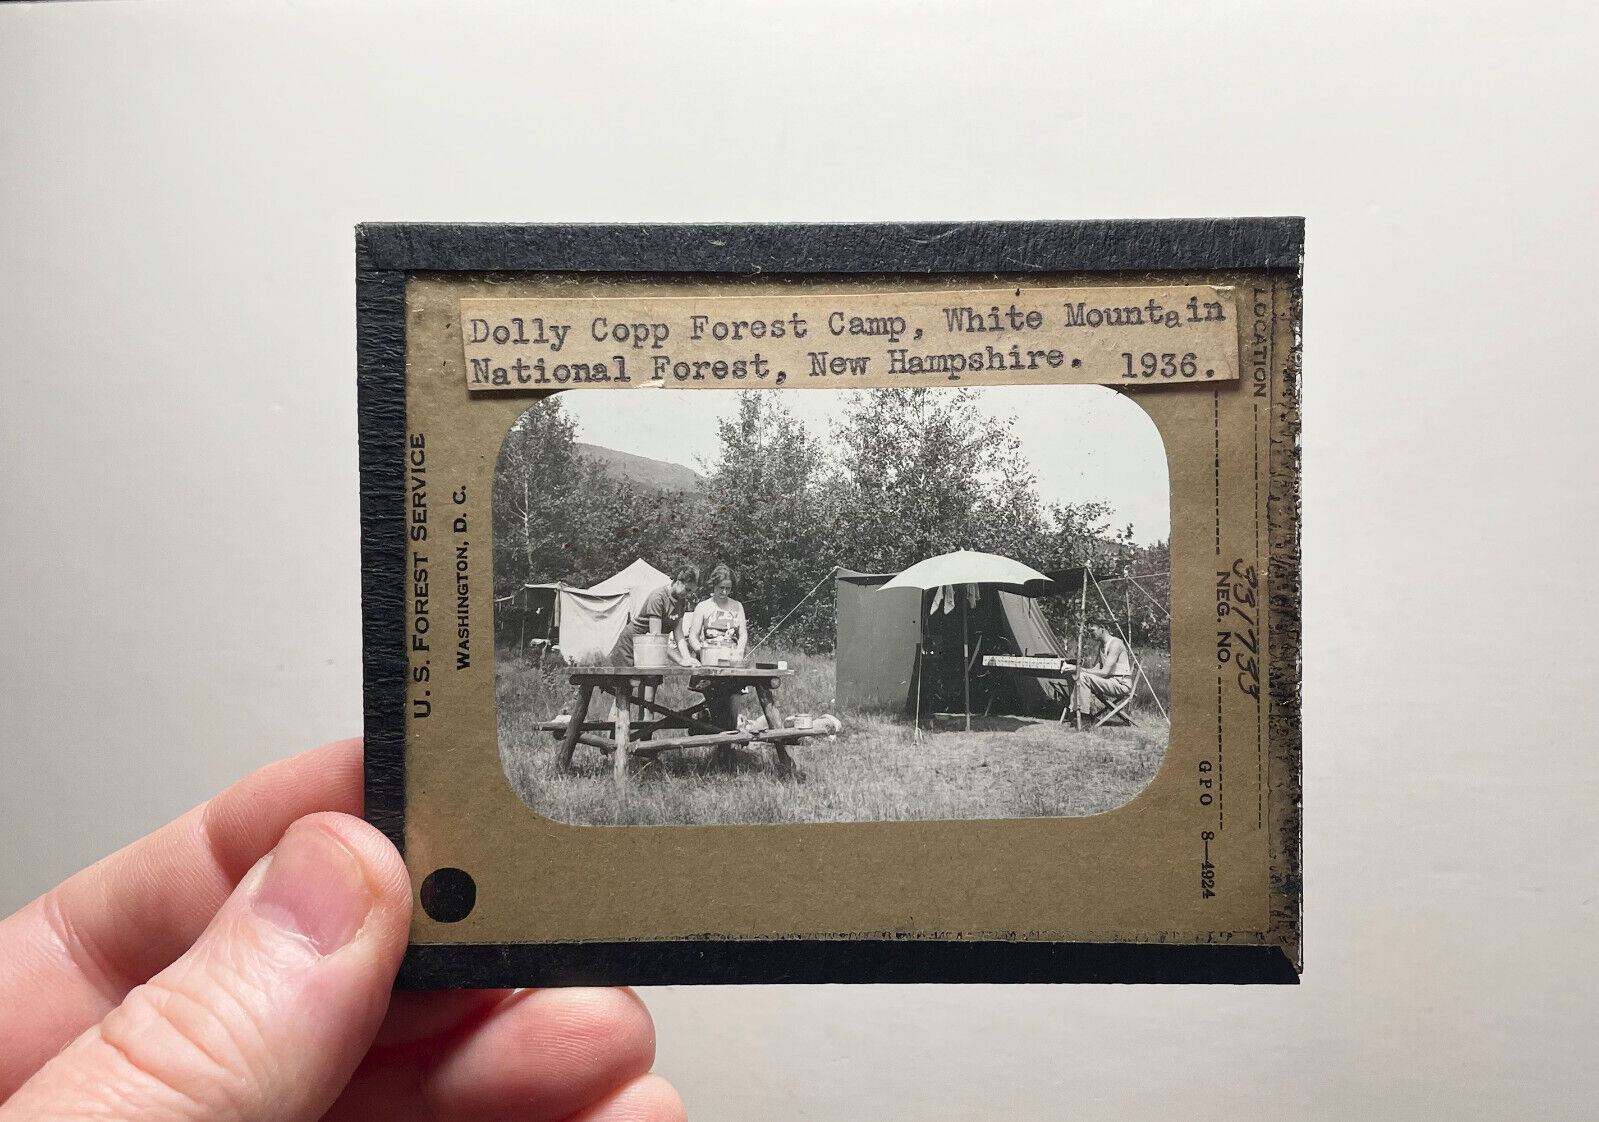 New Hampshire White Mountain Forest Dolly Copp Camp campers glass slide